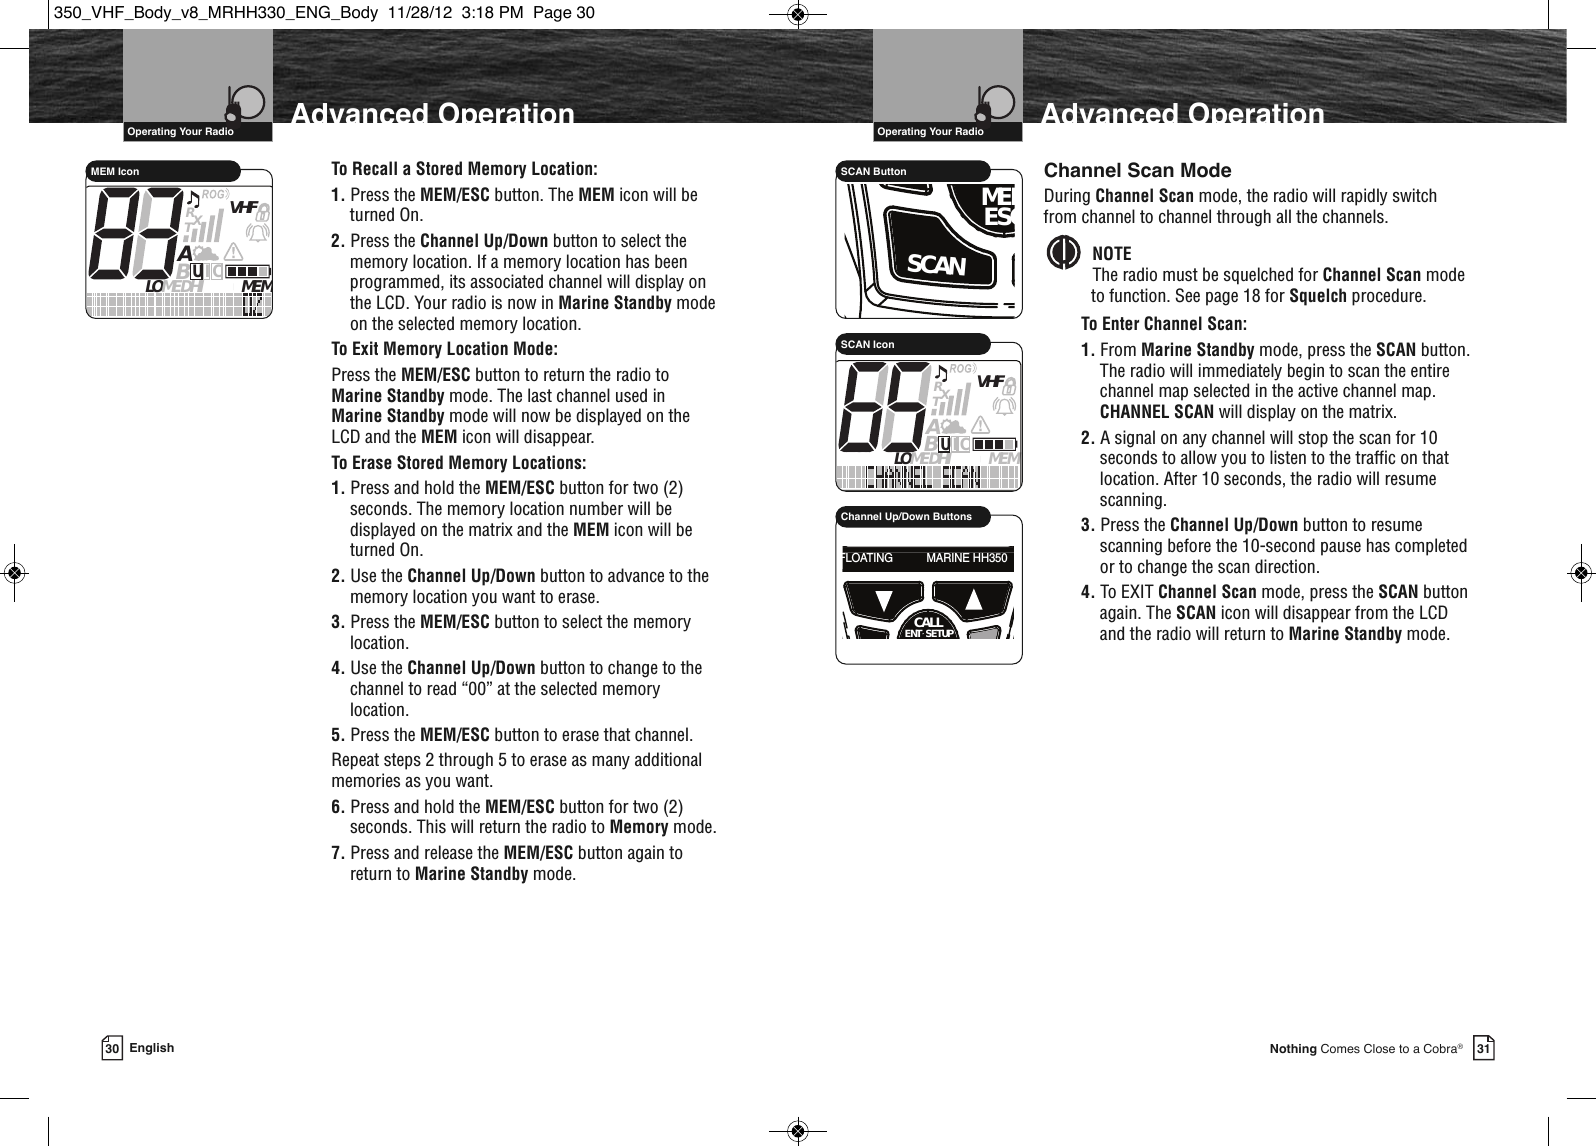 Page 18 of Cobra Electronics MRHH350 MARINE TRANSCEIVER User Manual MRHH330 ENG Body